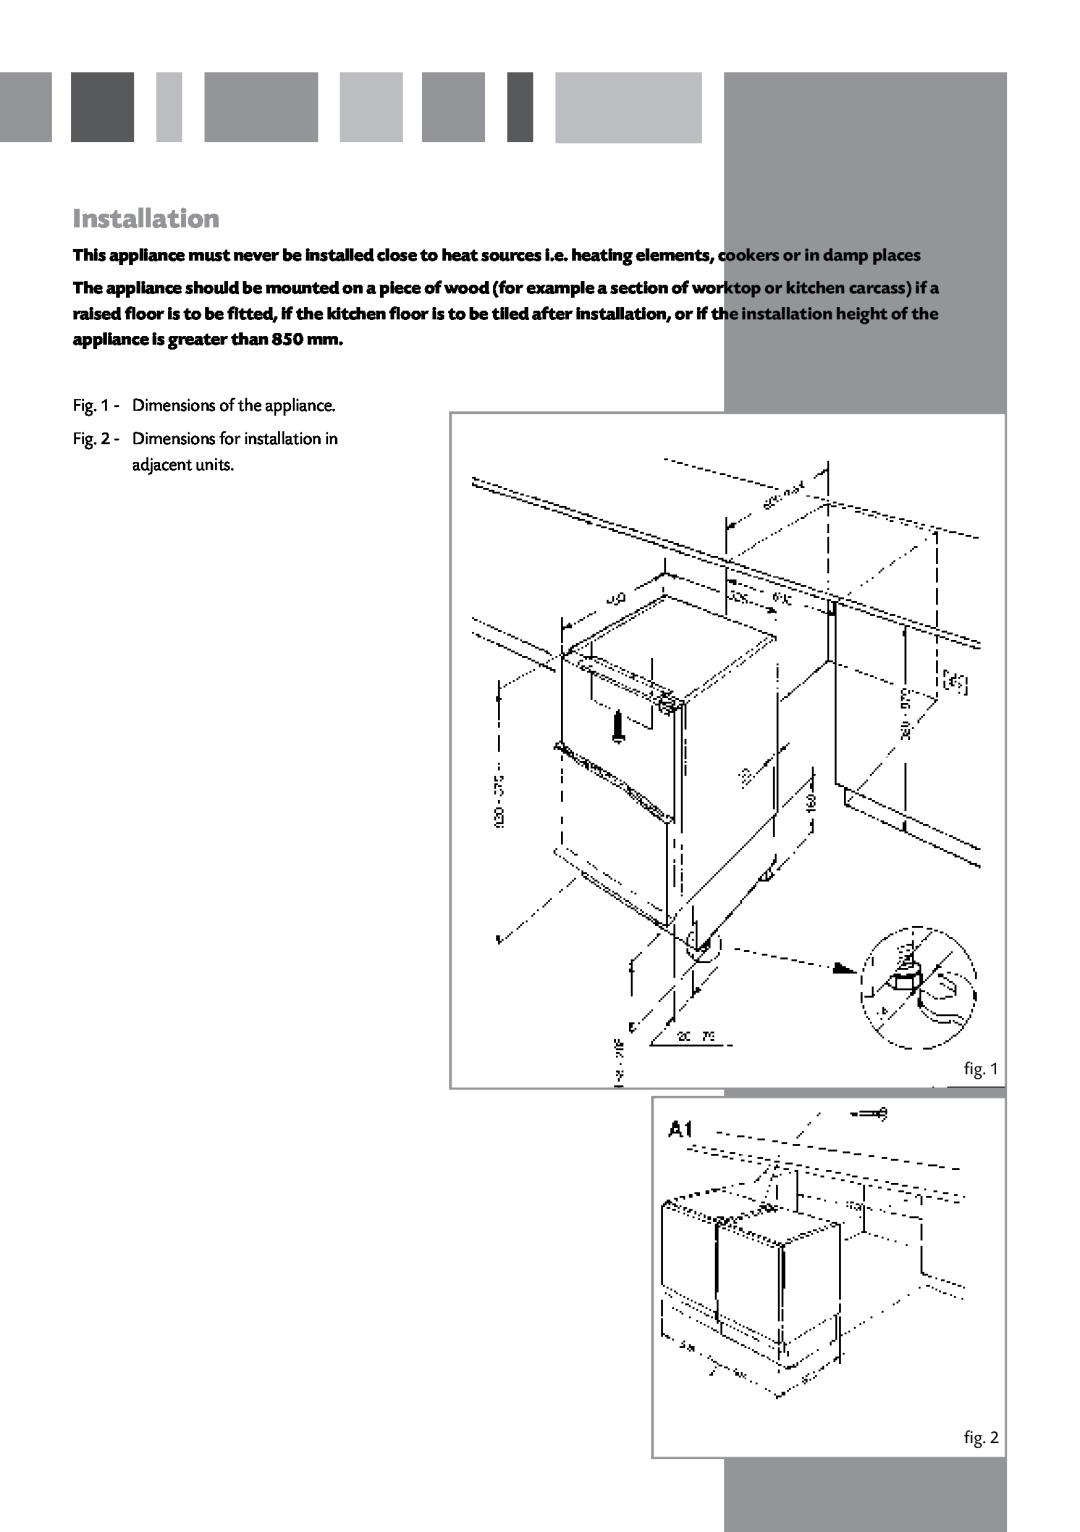 CDA FW281 manual Installation, Dimensions of the appliance 